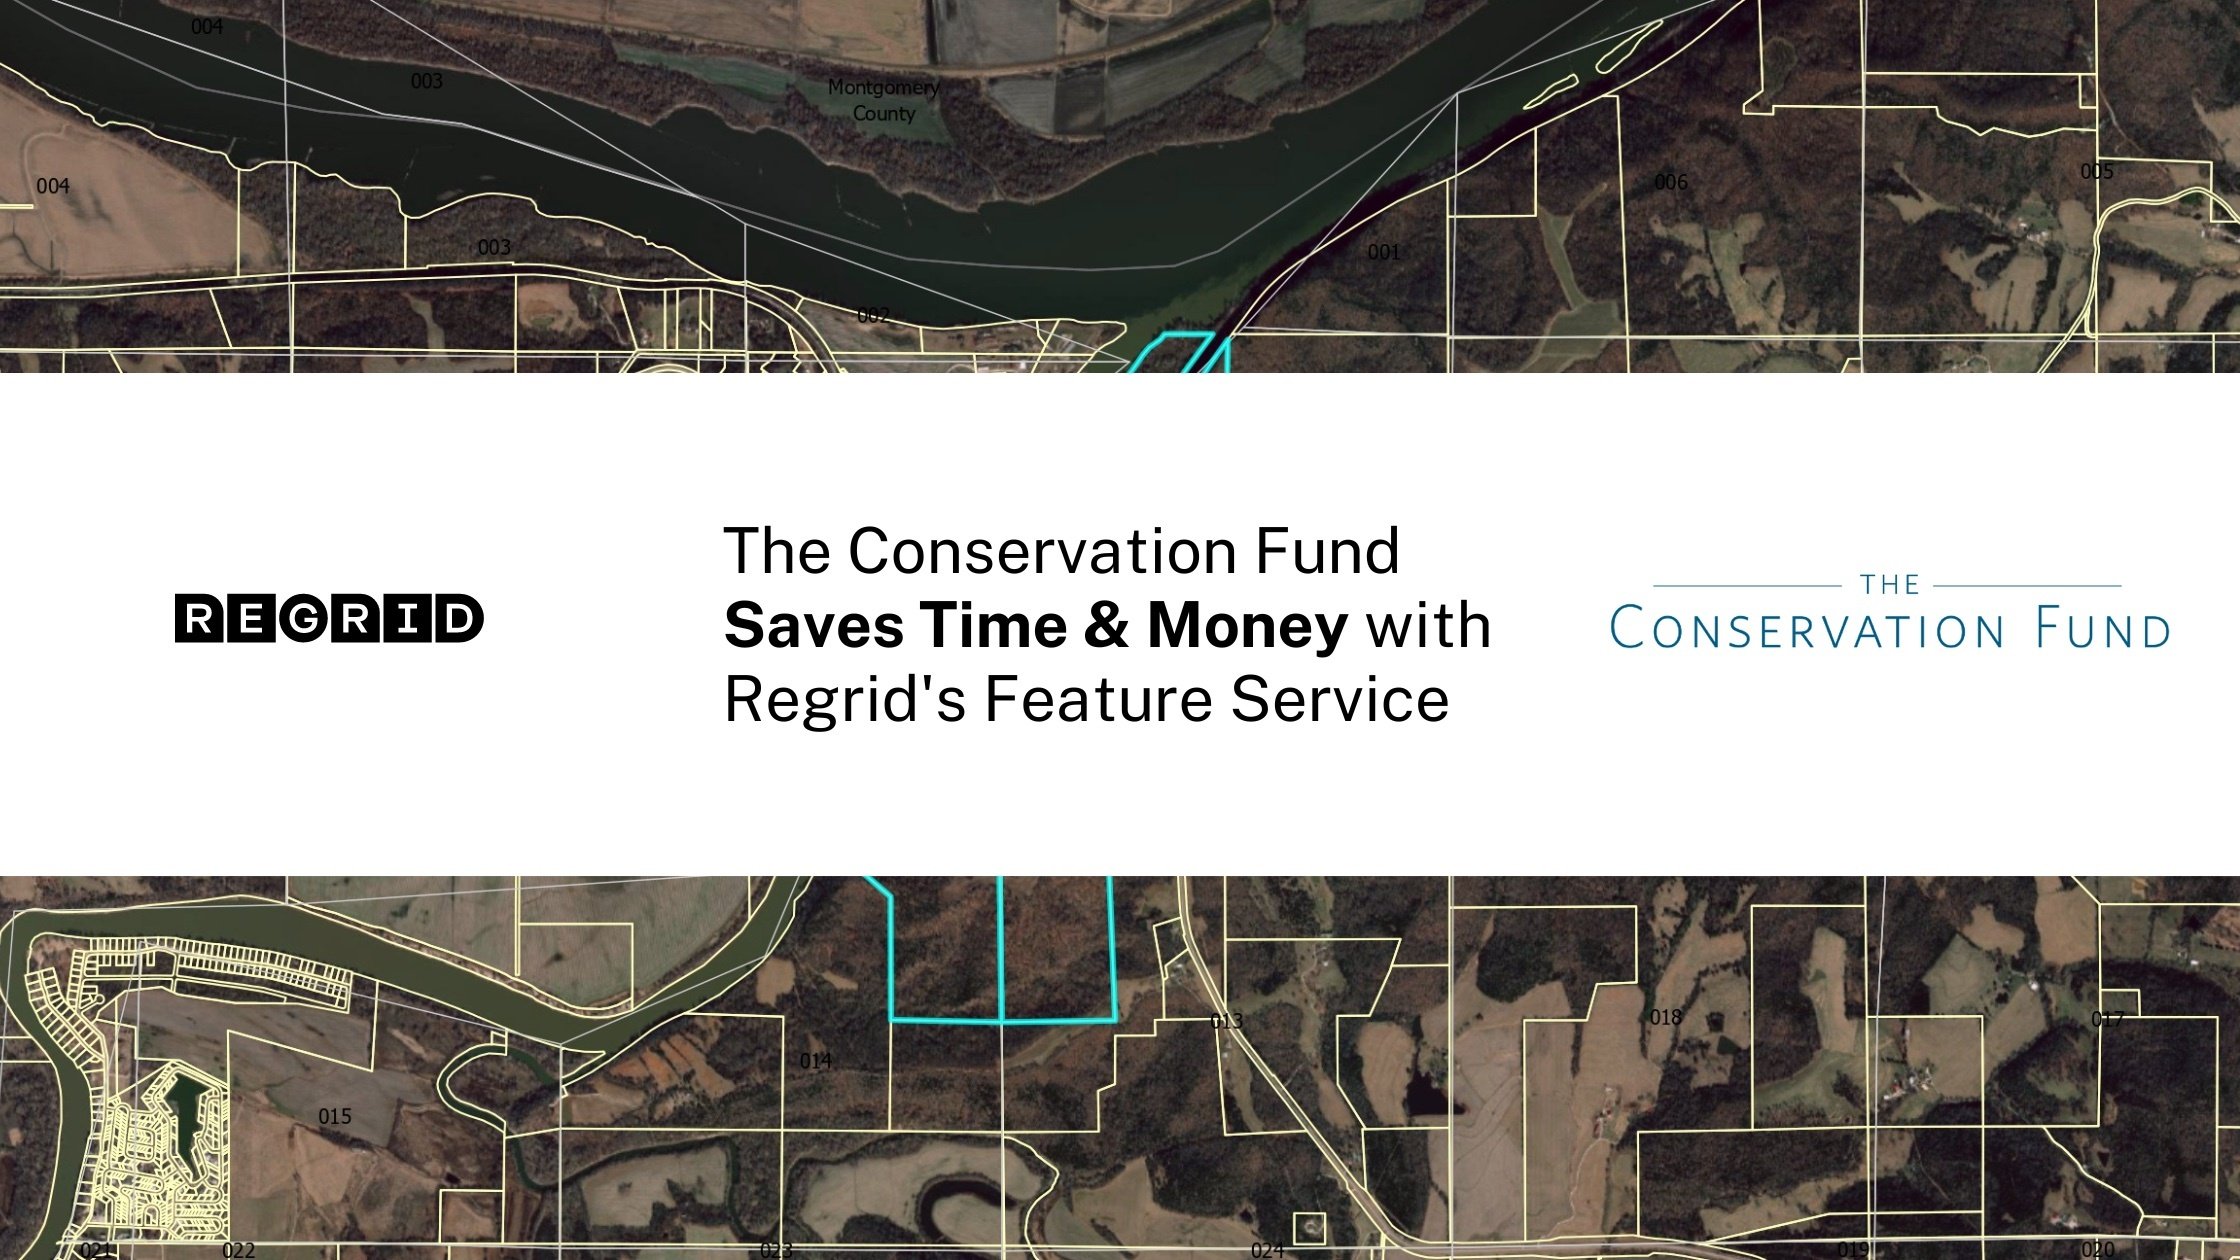 The Conservation Fund Saves Time & Money with Regrid's Feature Service